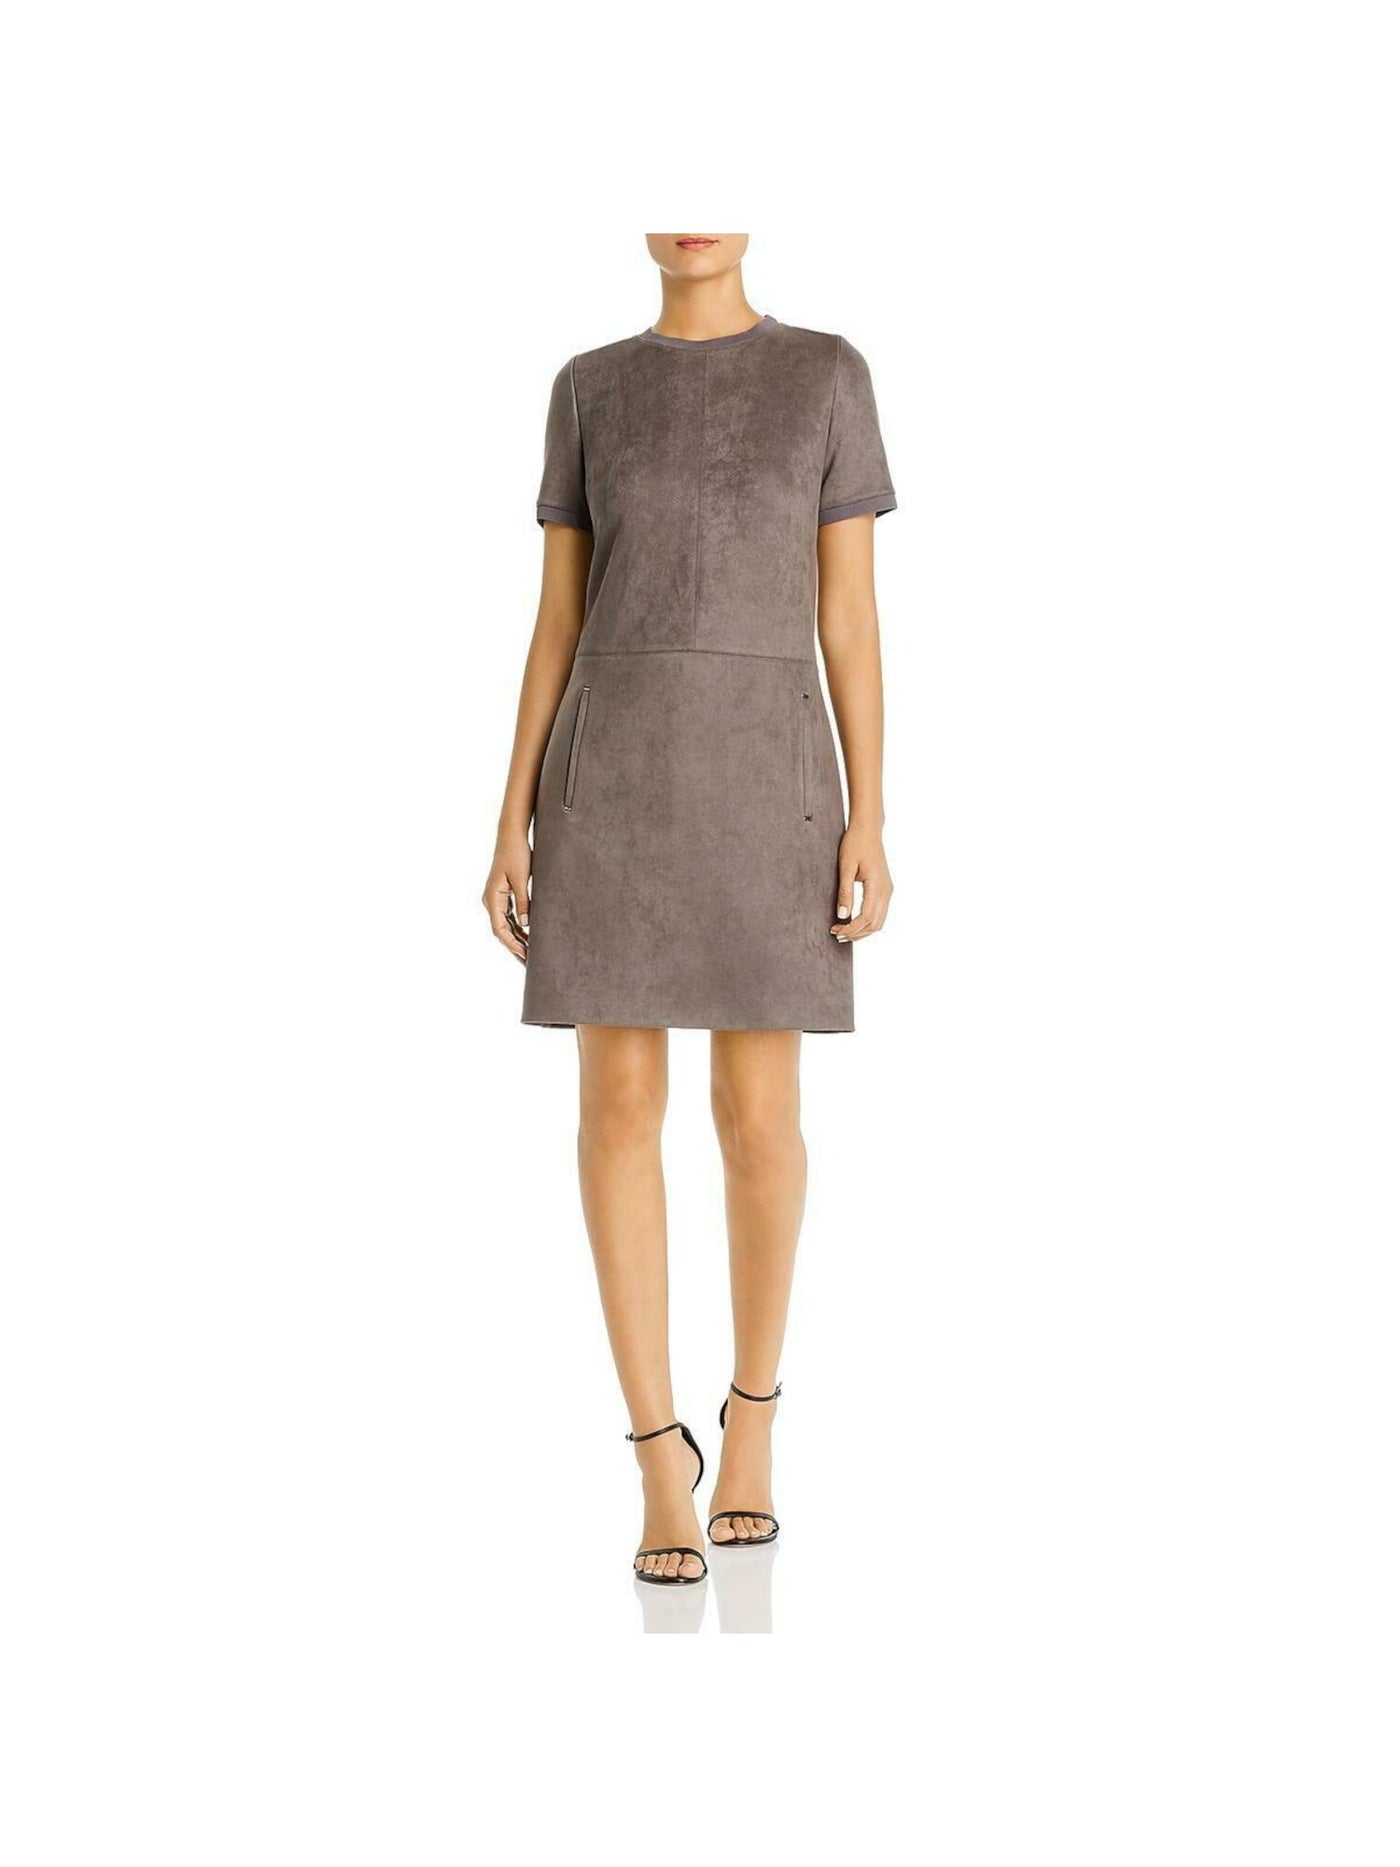 ELIE TAHARI Womens Gray Faux Suede Crew Neck Above The Knee Shift Dress Size: 2